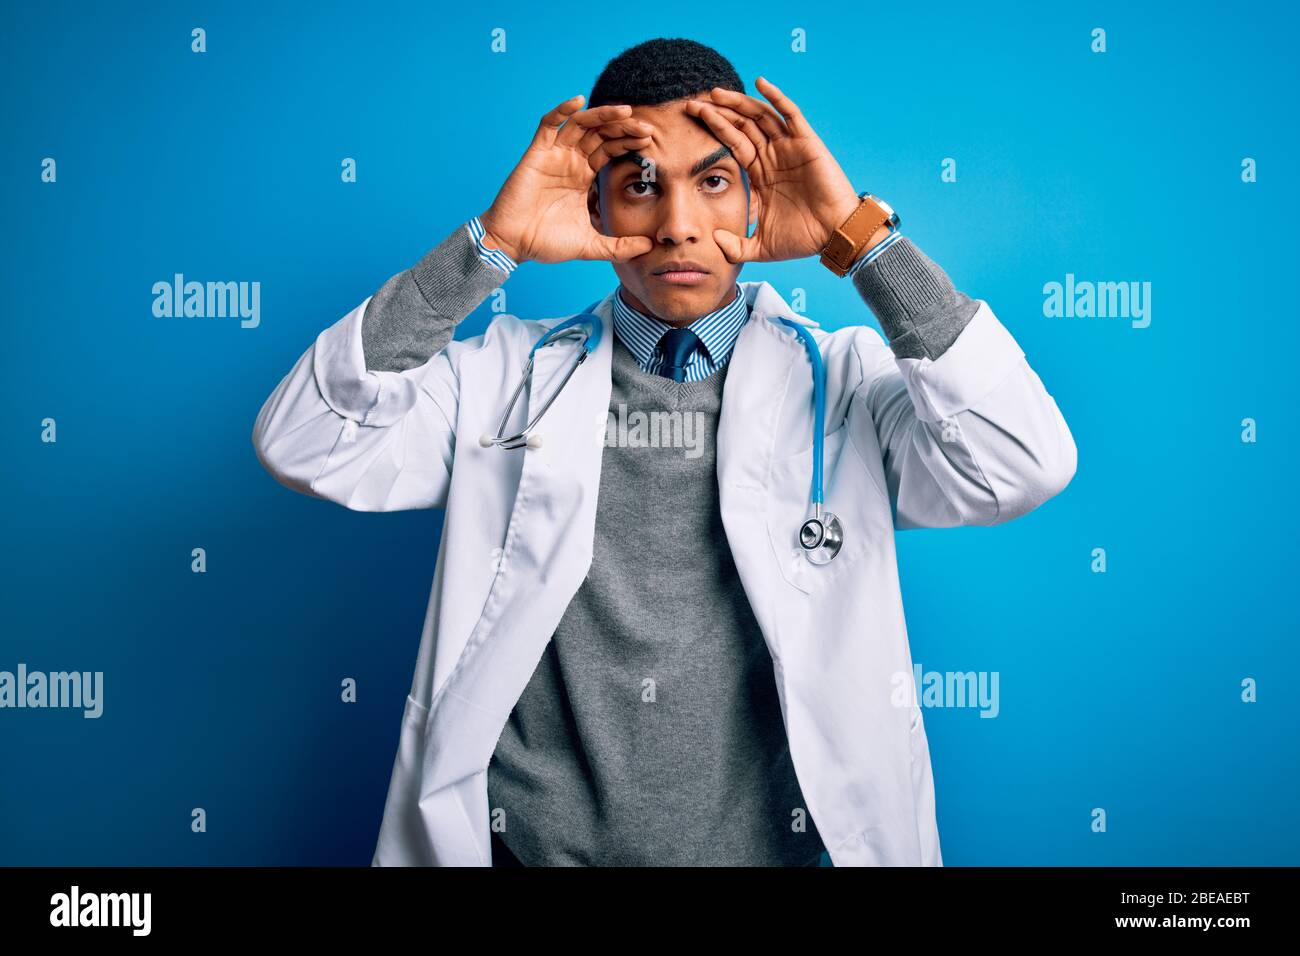 Handsome African American Doctor Man Wearing Coat And Stethoscope Over Blue Background Trying To